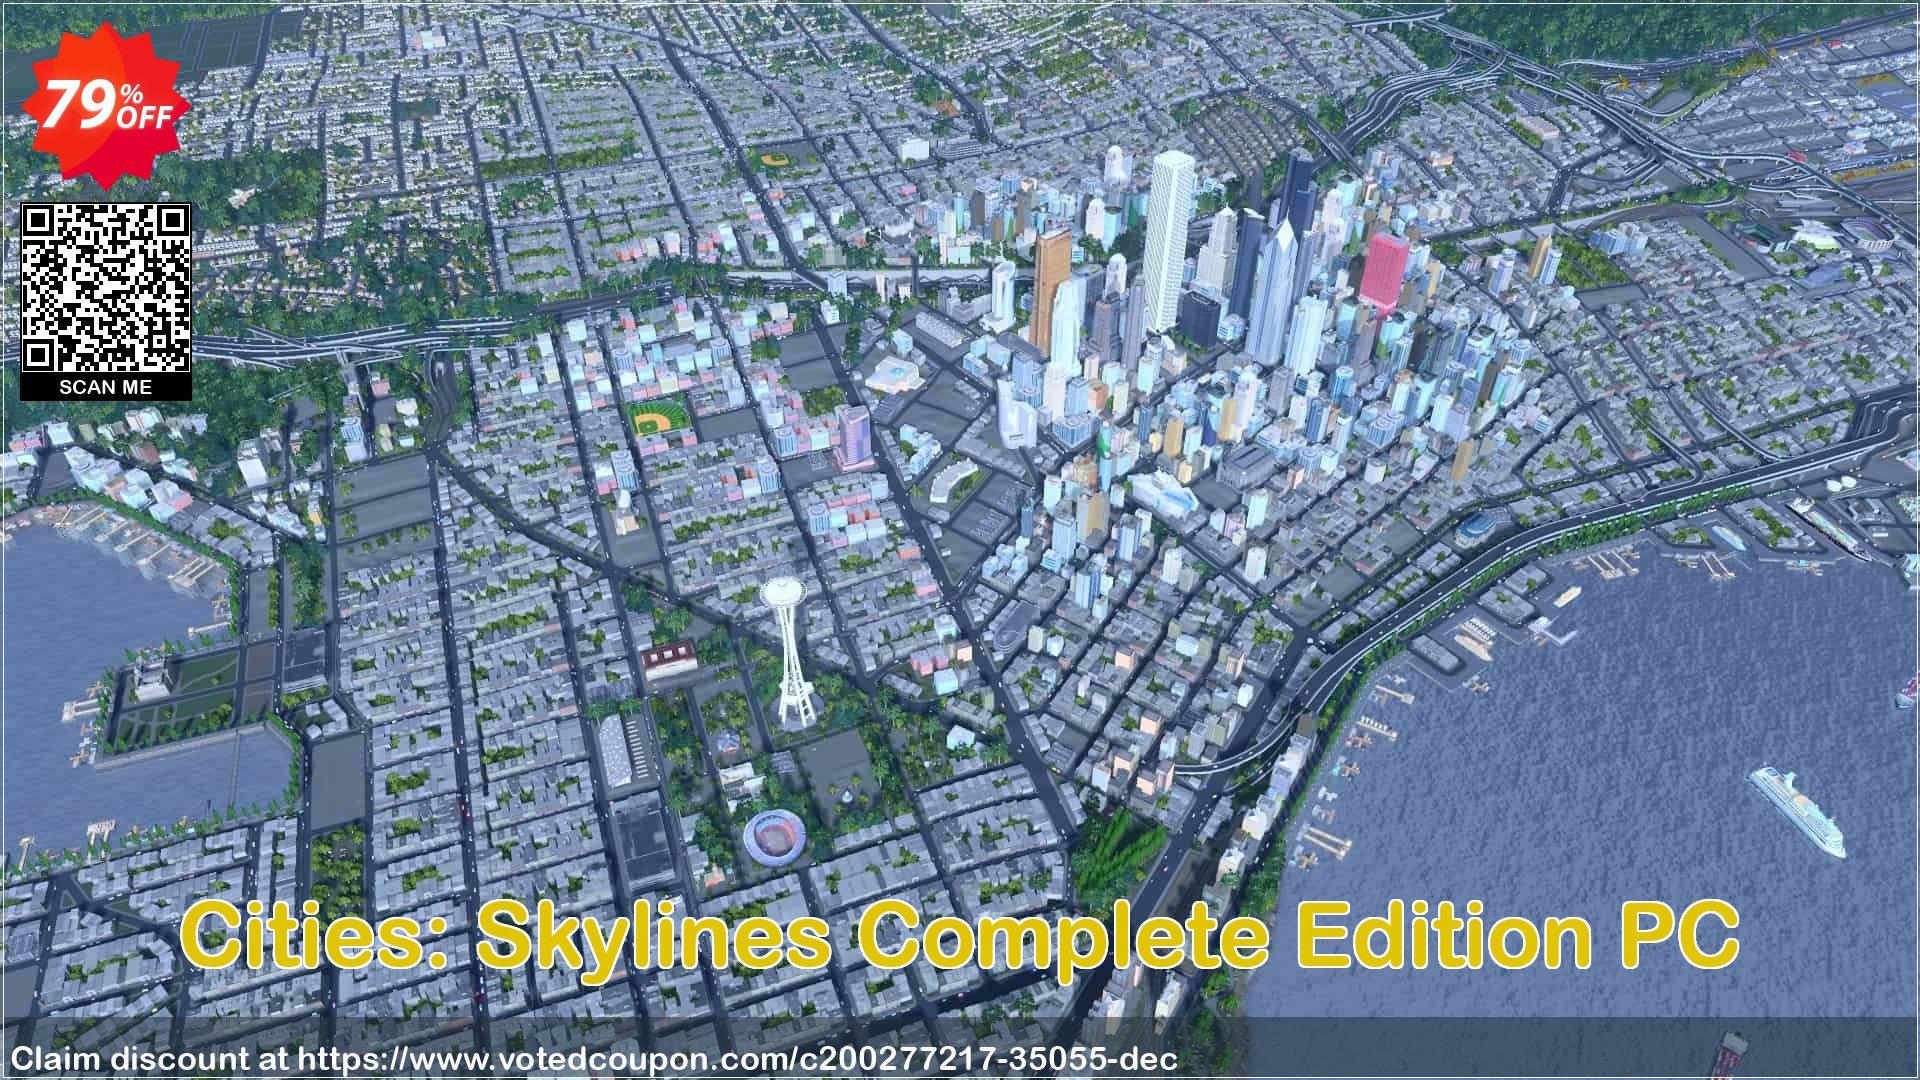 Cities: Skylines Complete Edition PC Coupon Code Apr 2024, 79% OFF - VotedCoupon